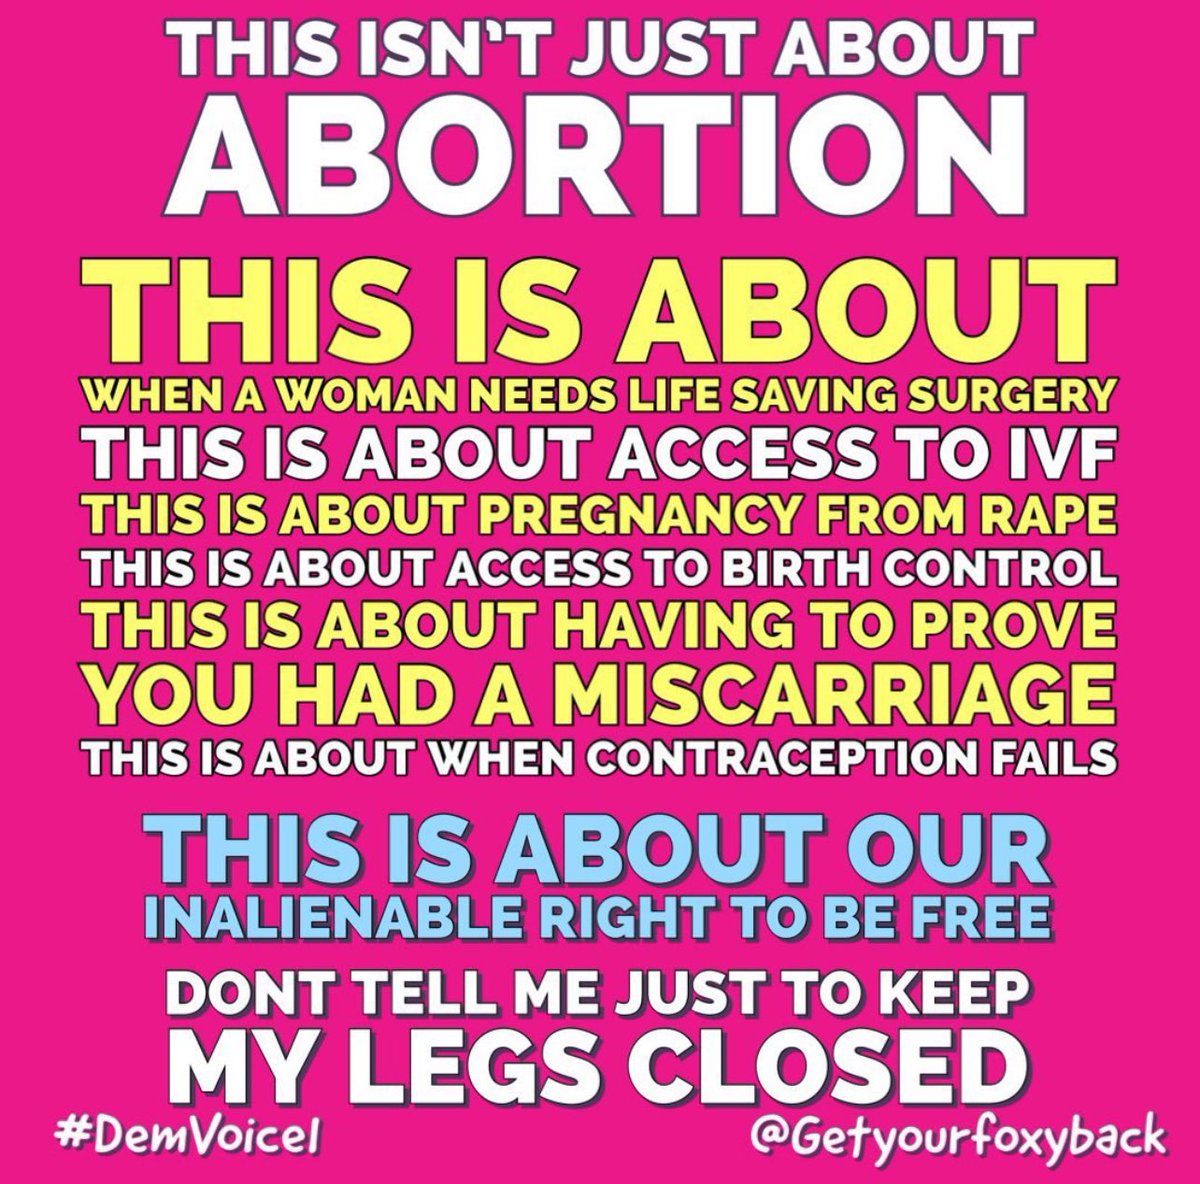 160,000 women had to leave their states to get reproductive care last yr The Republicans are sending us back to the 19th century Even birth control is being taken away, IVF Trump said to criminalize us WE THE PEOPLE ARE WATCHING Trump is responsible for this #ONEV1 #RoeYourVote